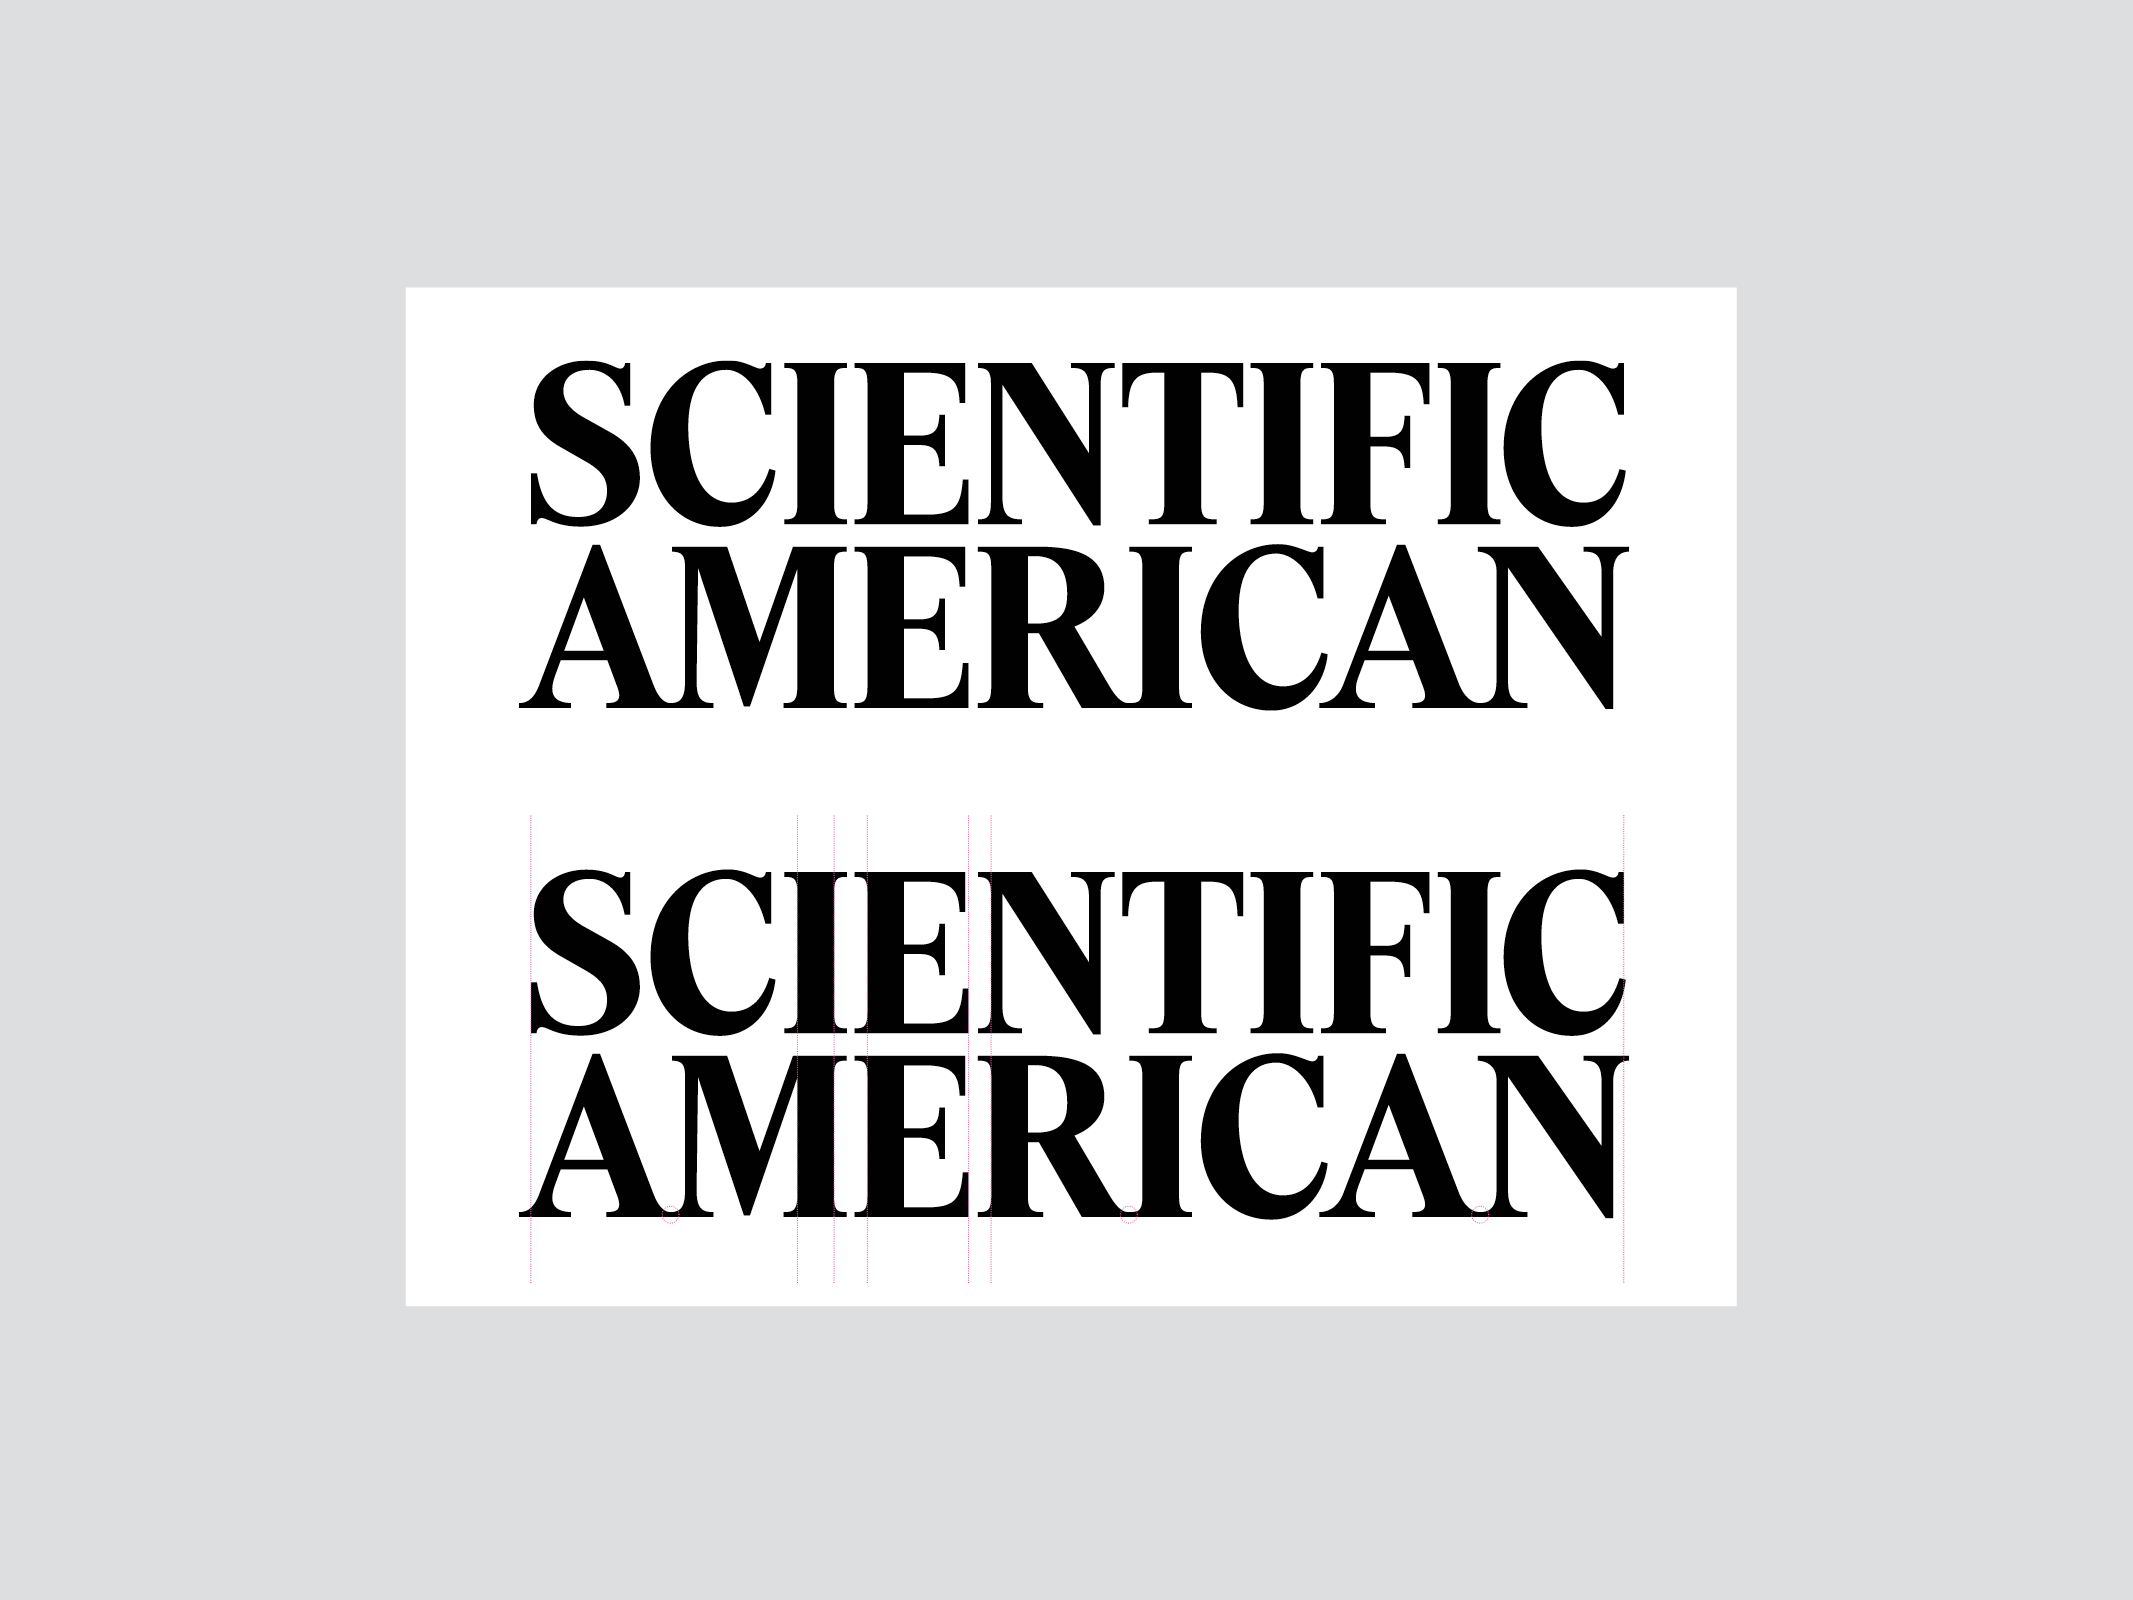 Two of the new Scientific American logos.